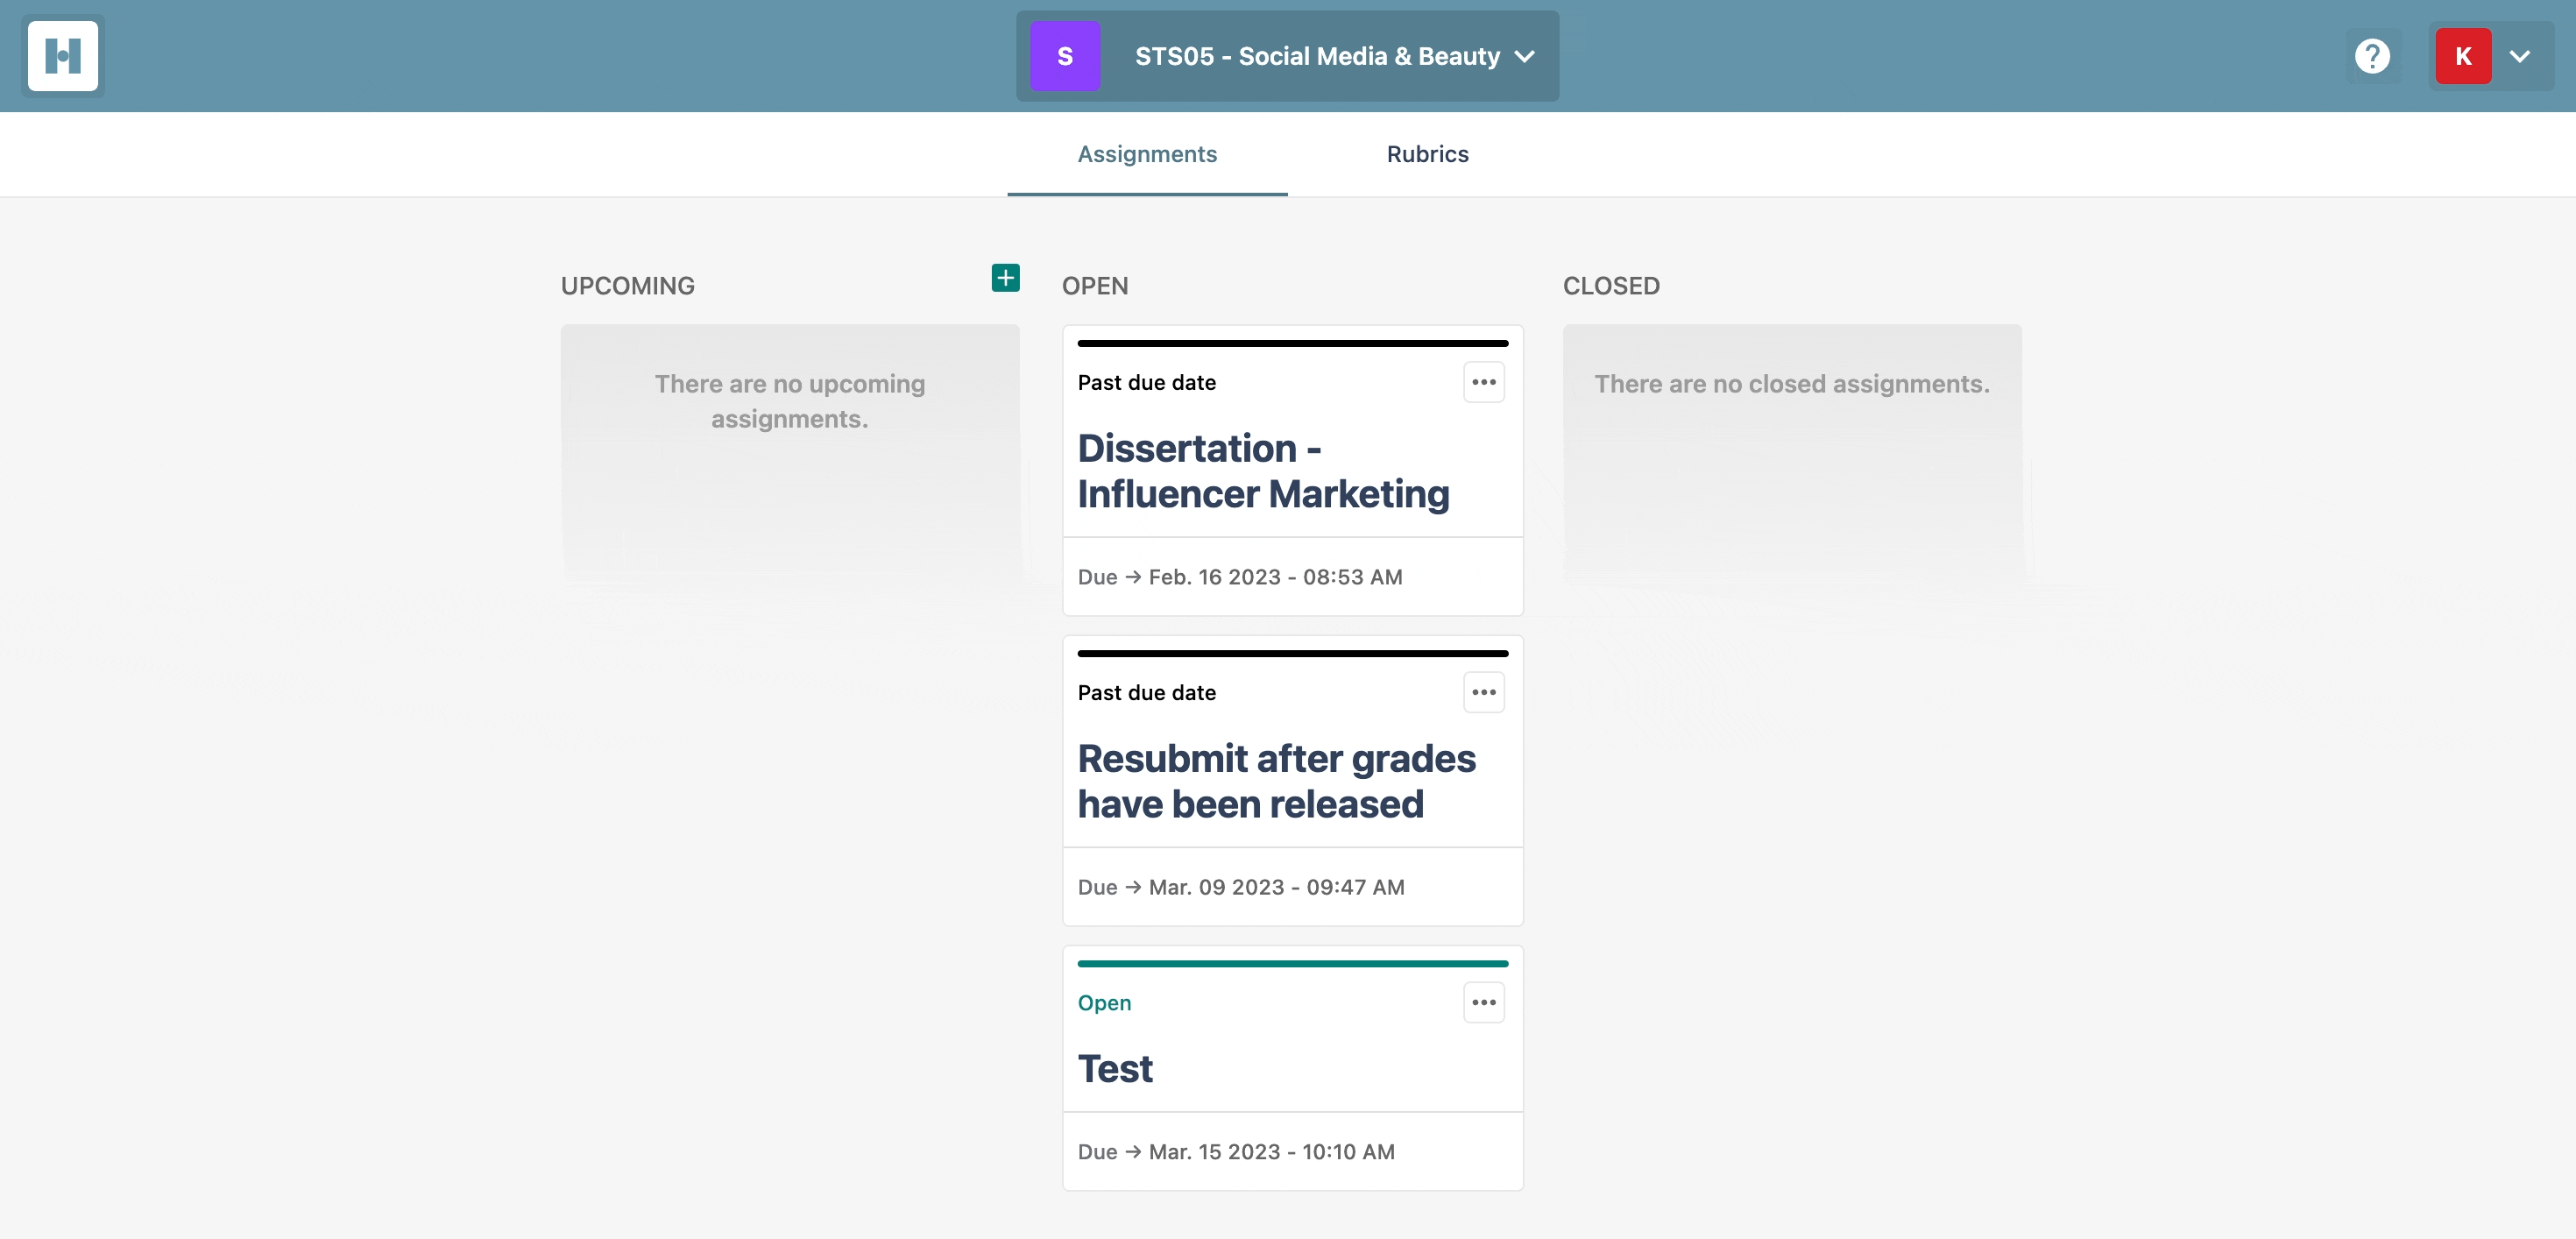 GIF showing how to delete a rubric